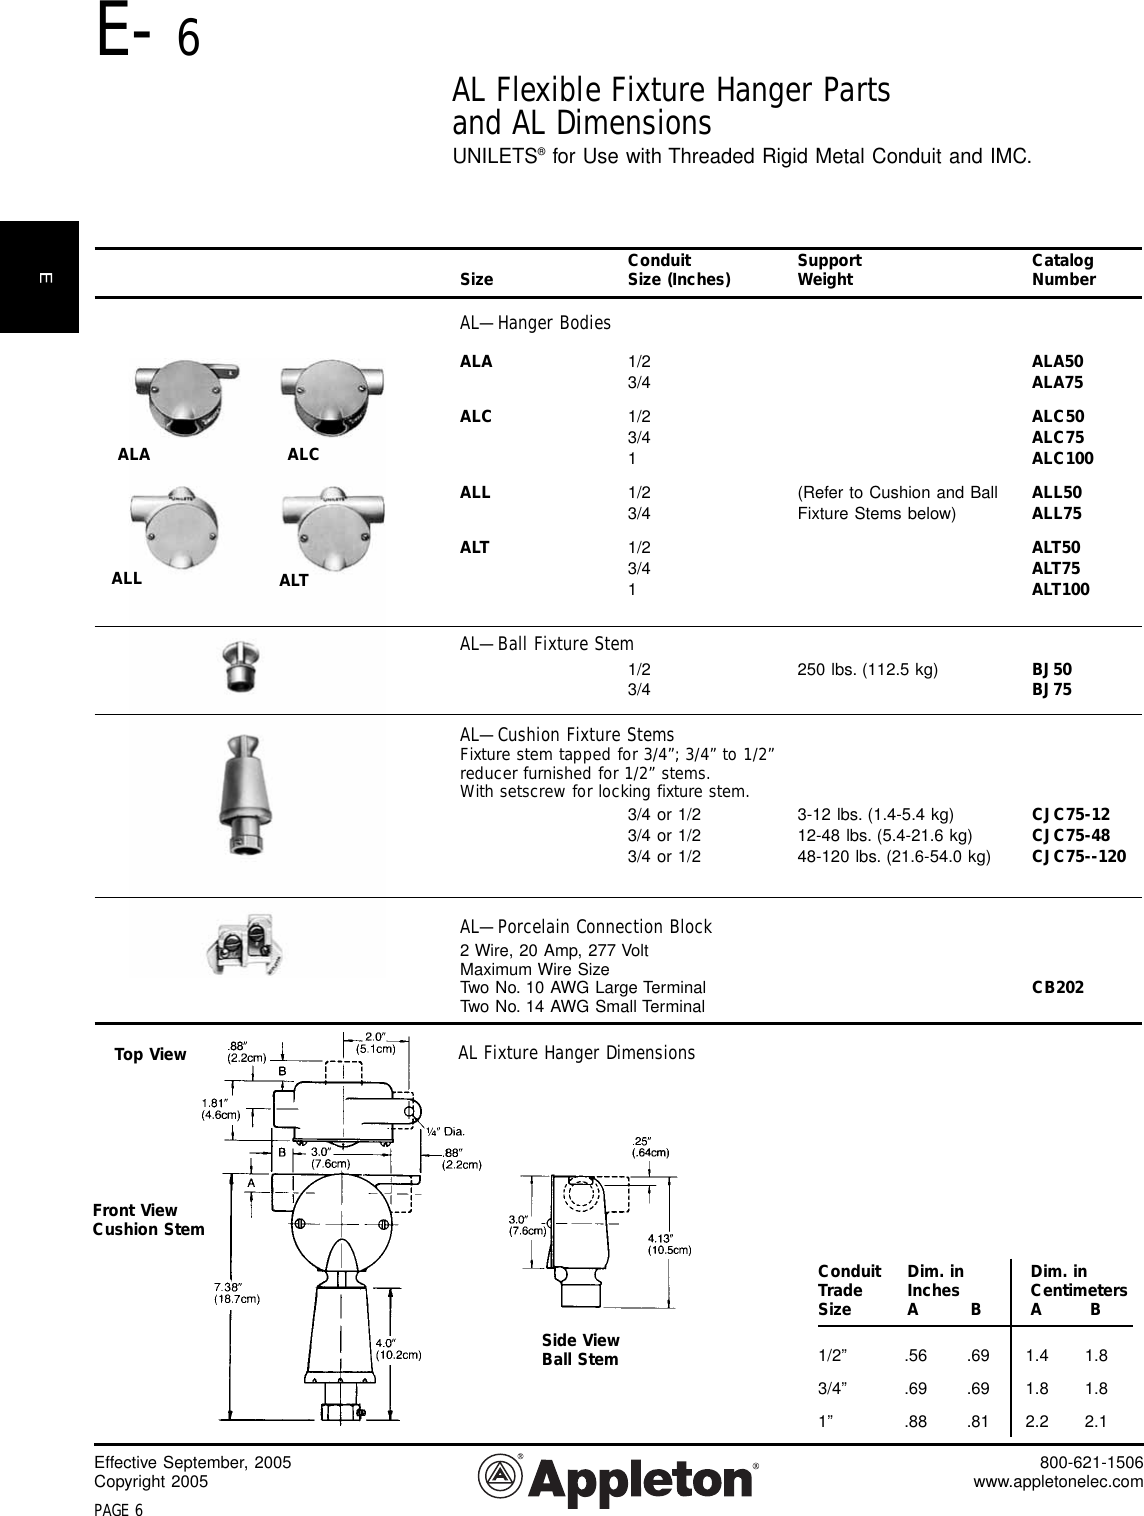 Page 5 of 11 - Product Detail Manual 